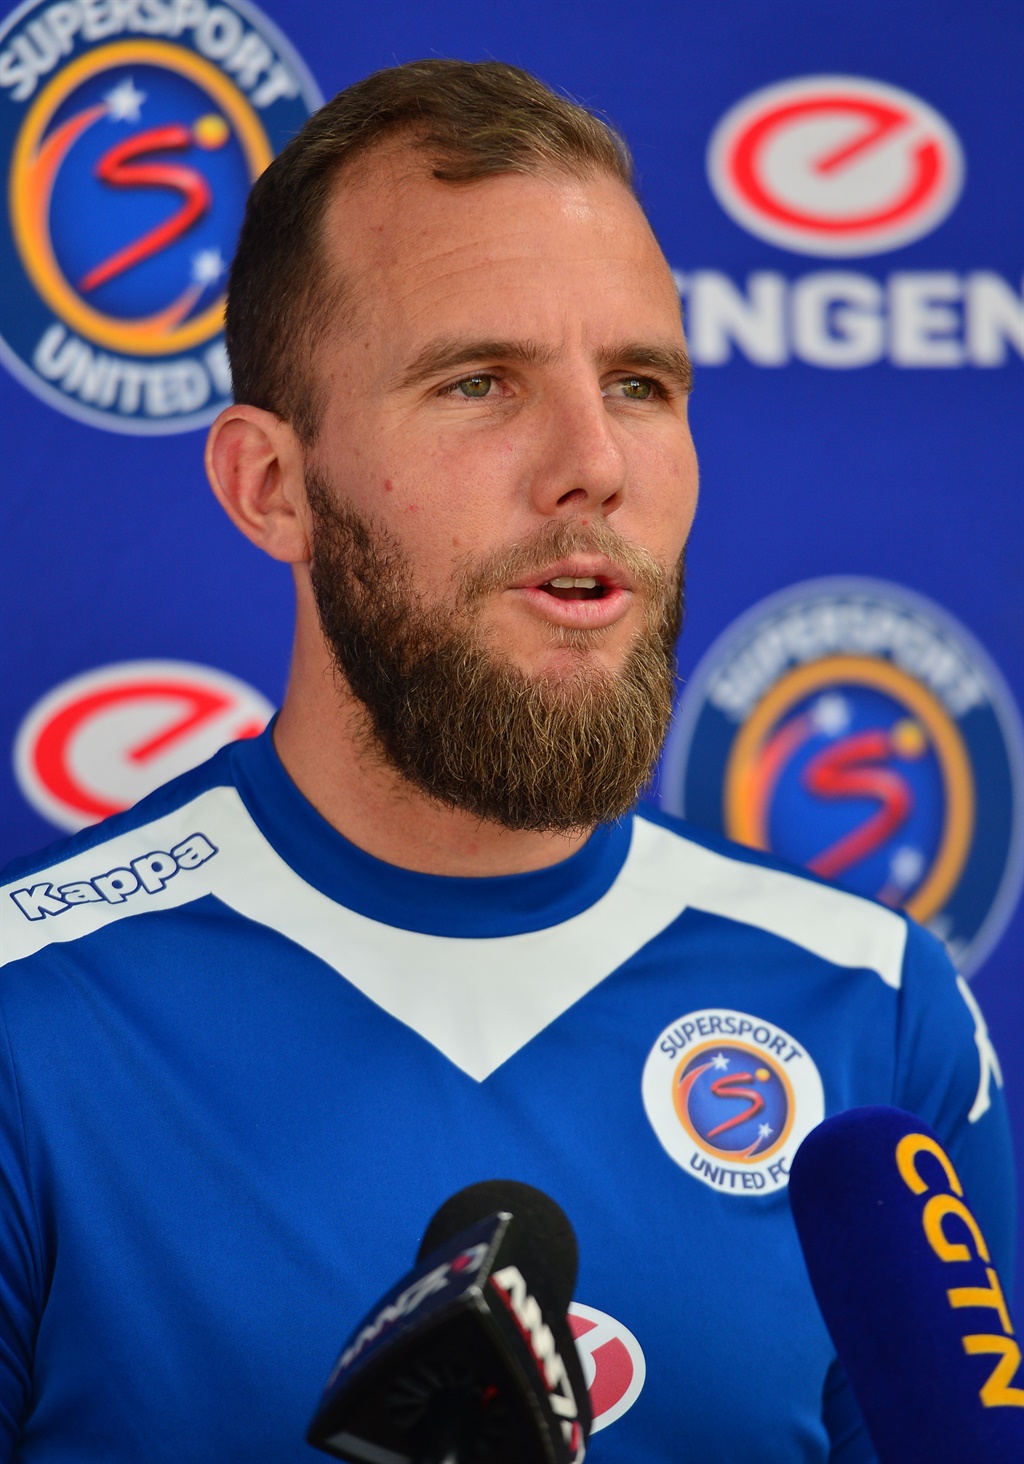 Jeremy Brockie must live up to his promise to SuperSport United’s big bosses before he will be released